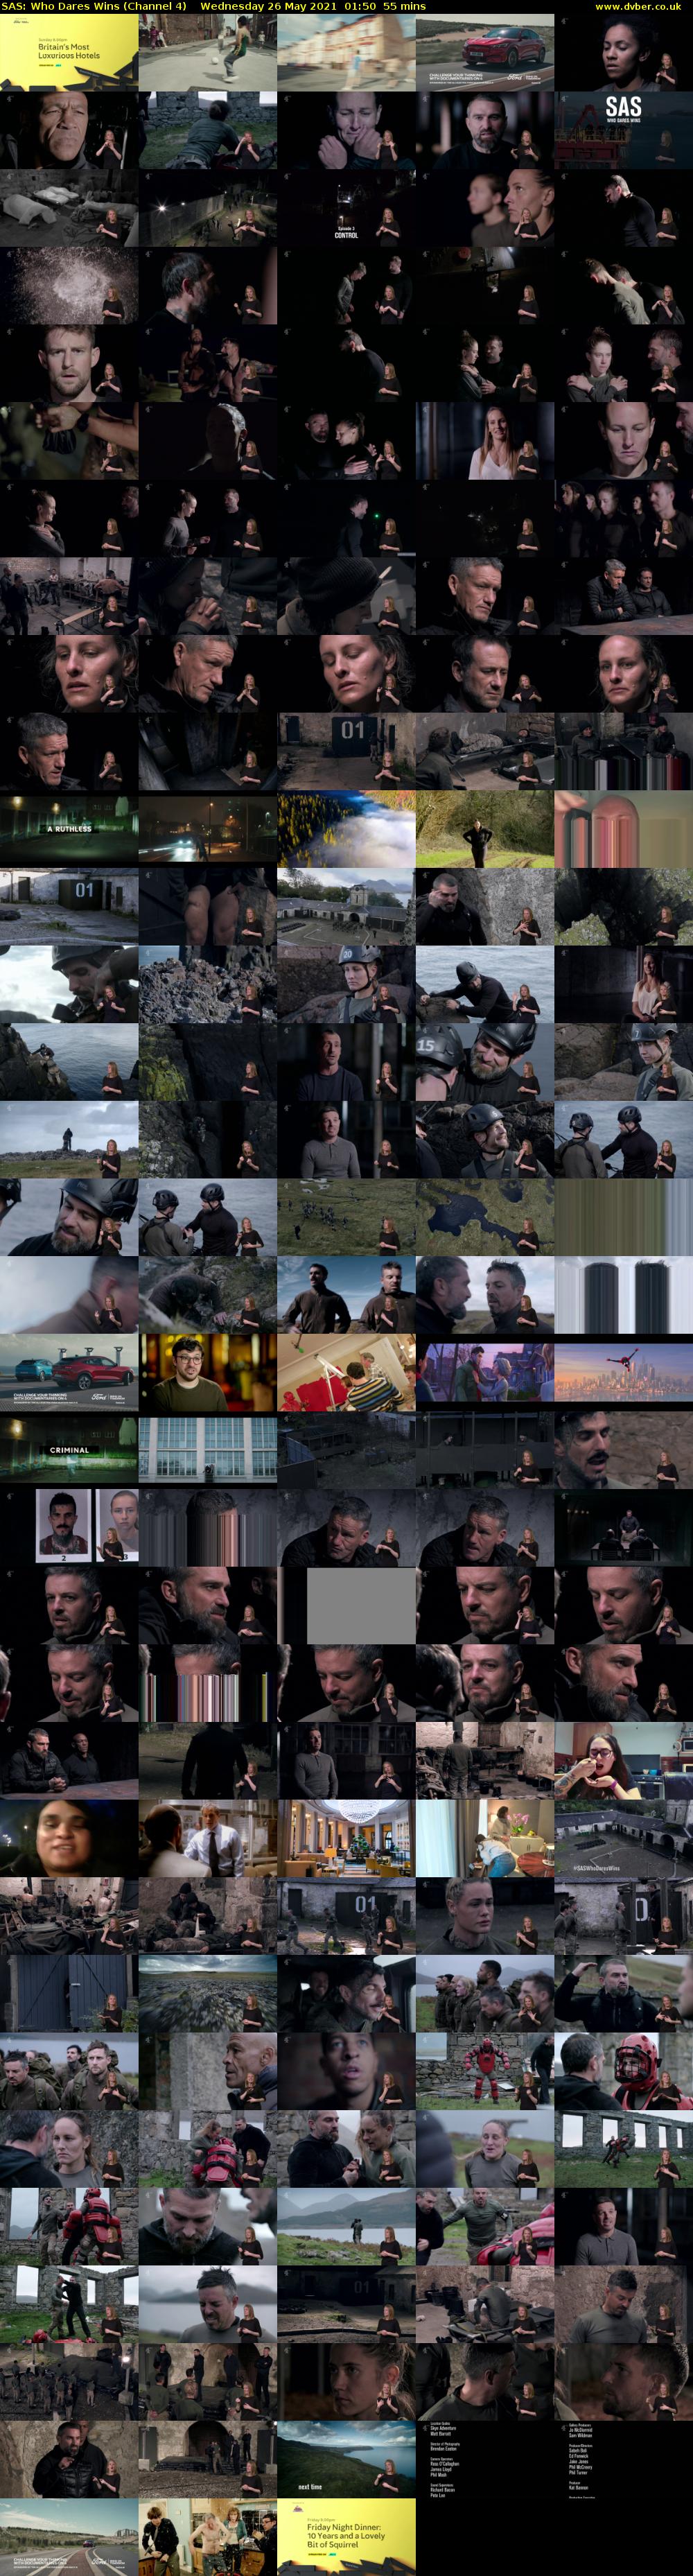 SAS: Who Dares Wins (Channel 4) Wednesday 26 May 2021 01:50 - 02:45